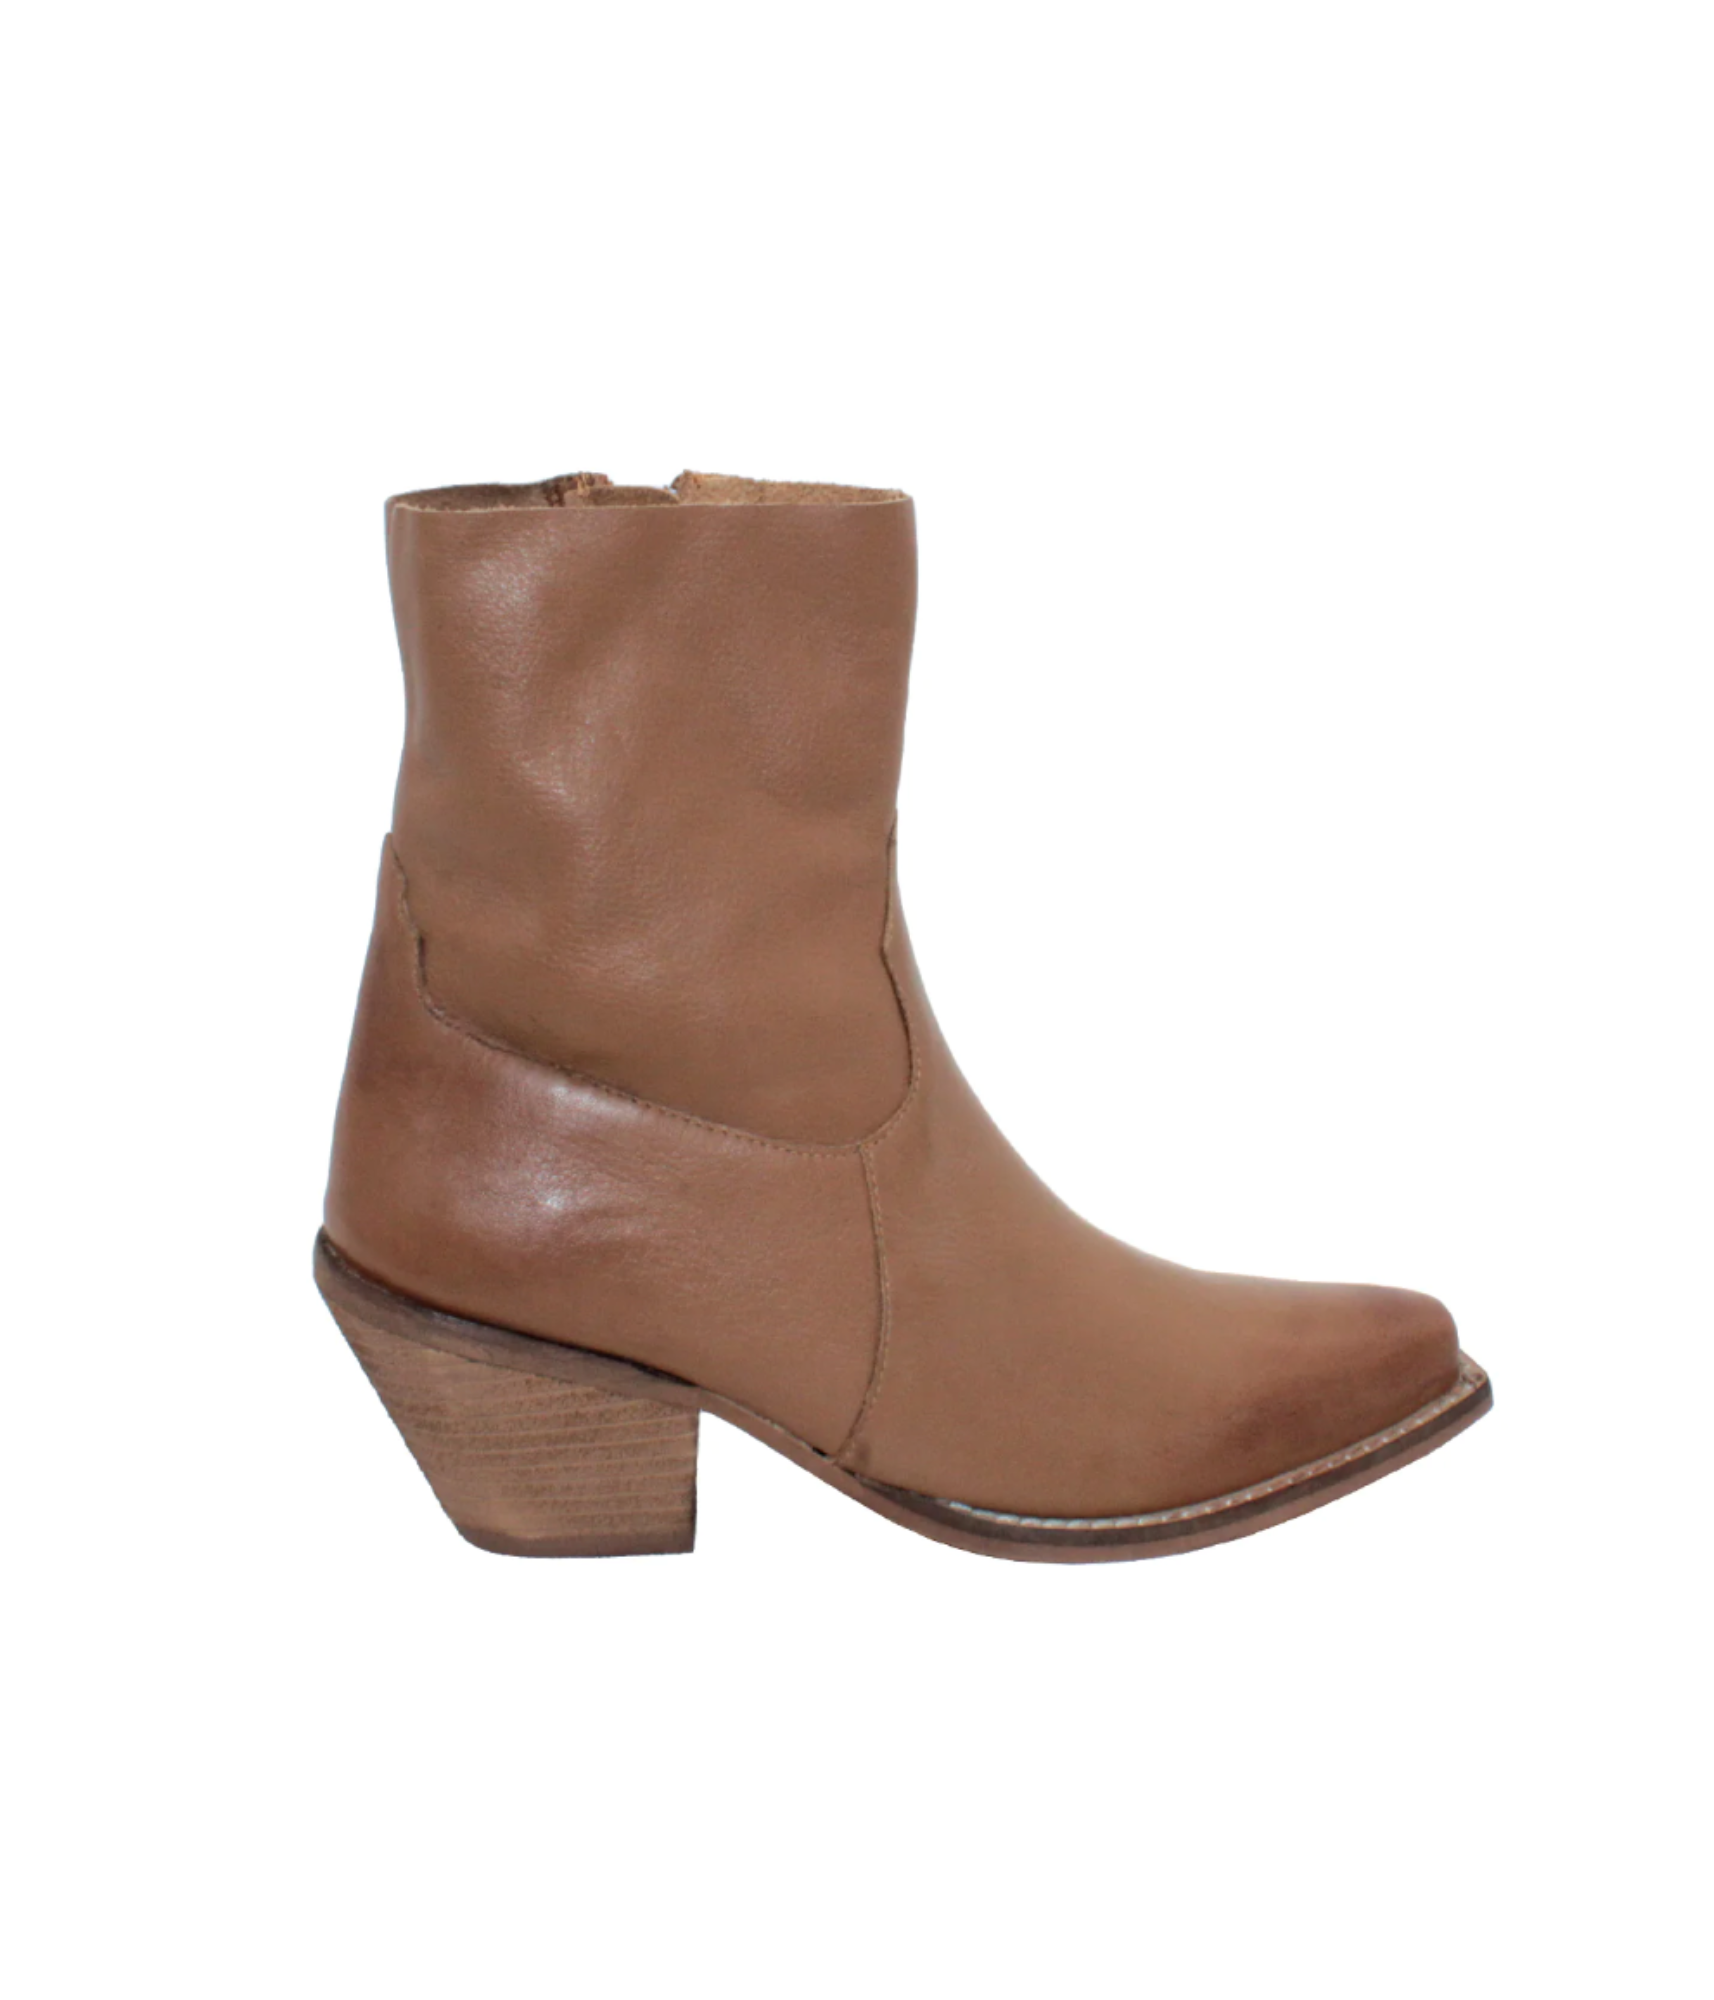 Lariat Leather Ankle Bootie in Tan